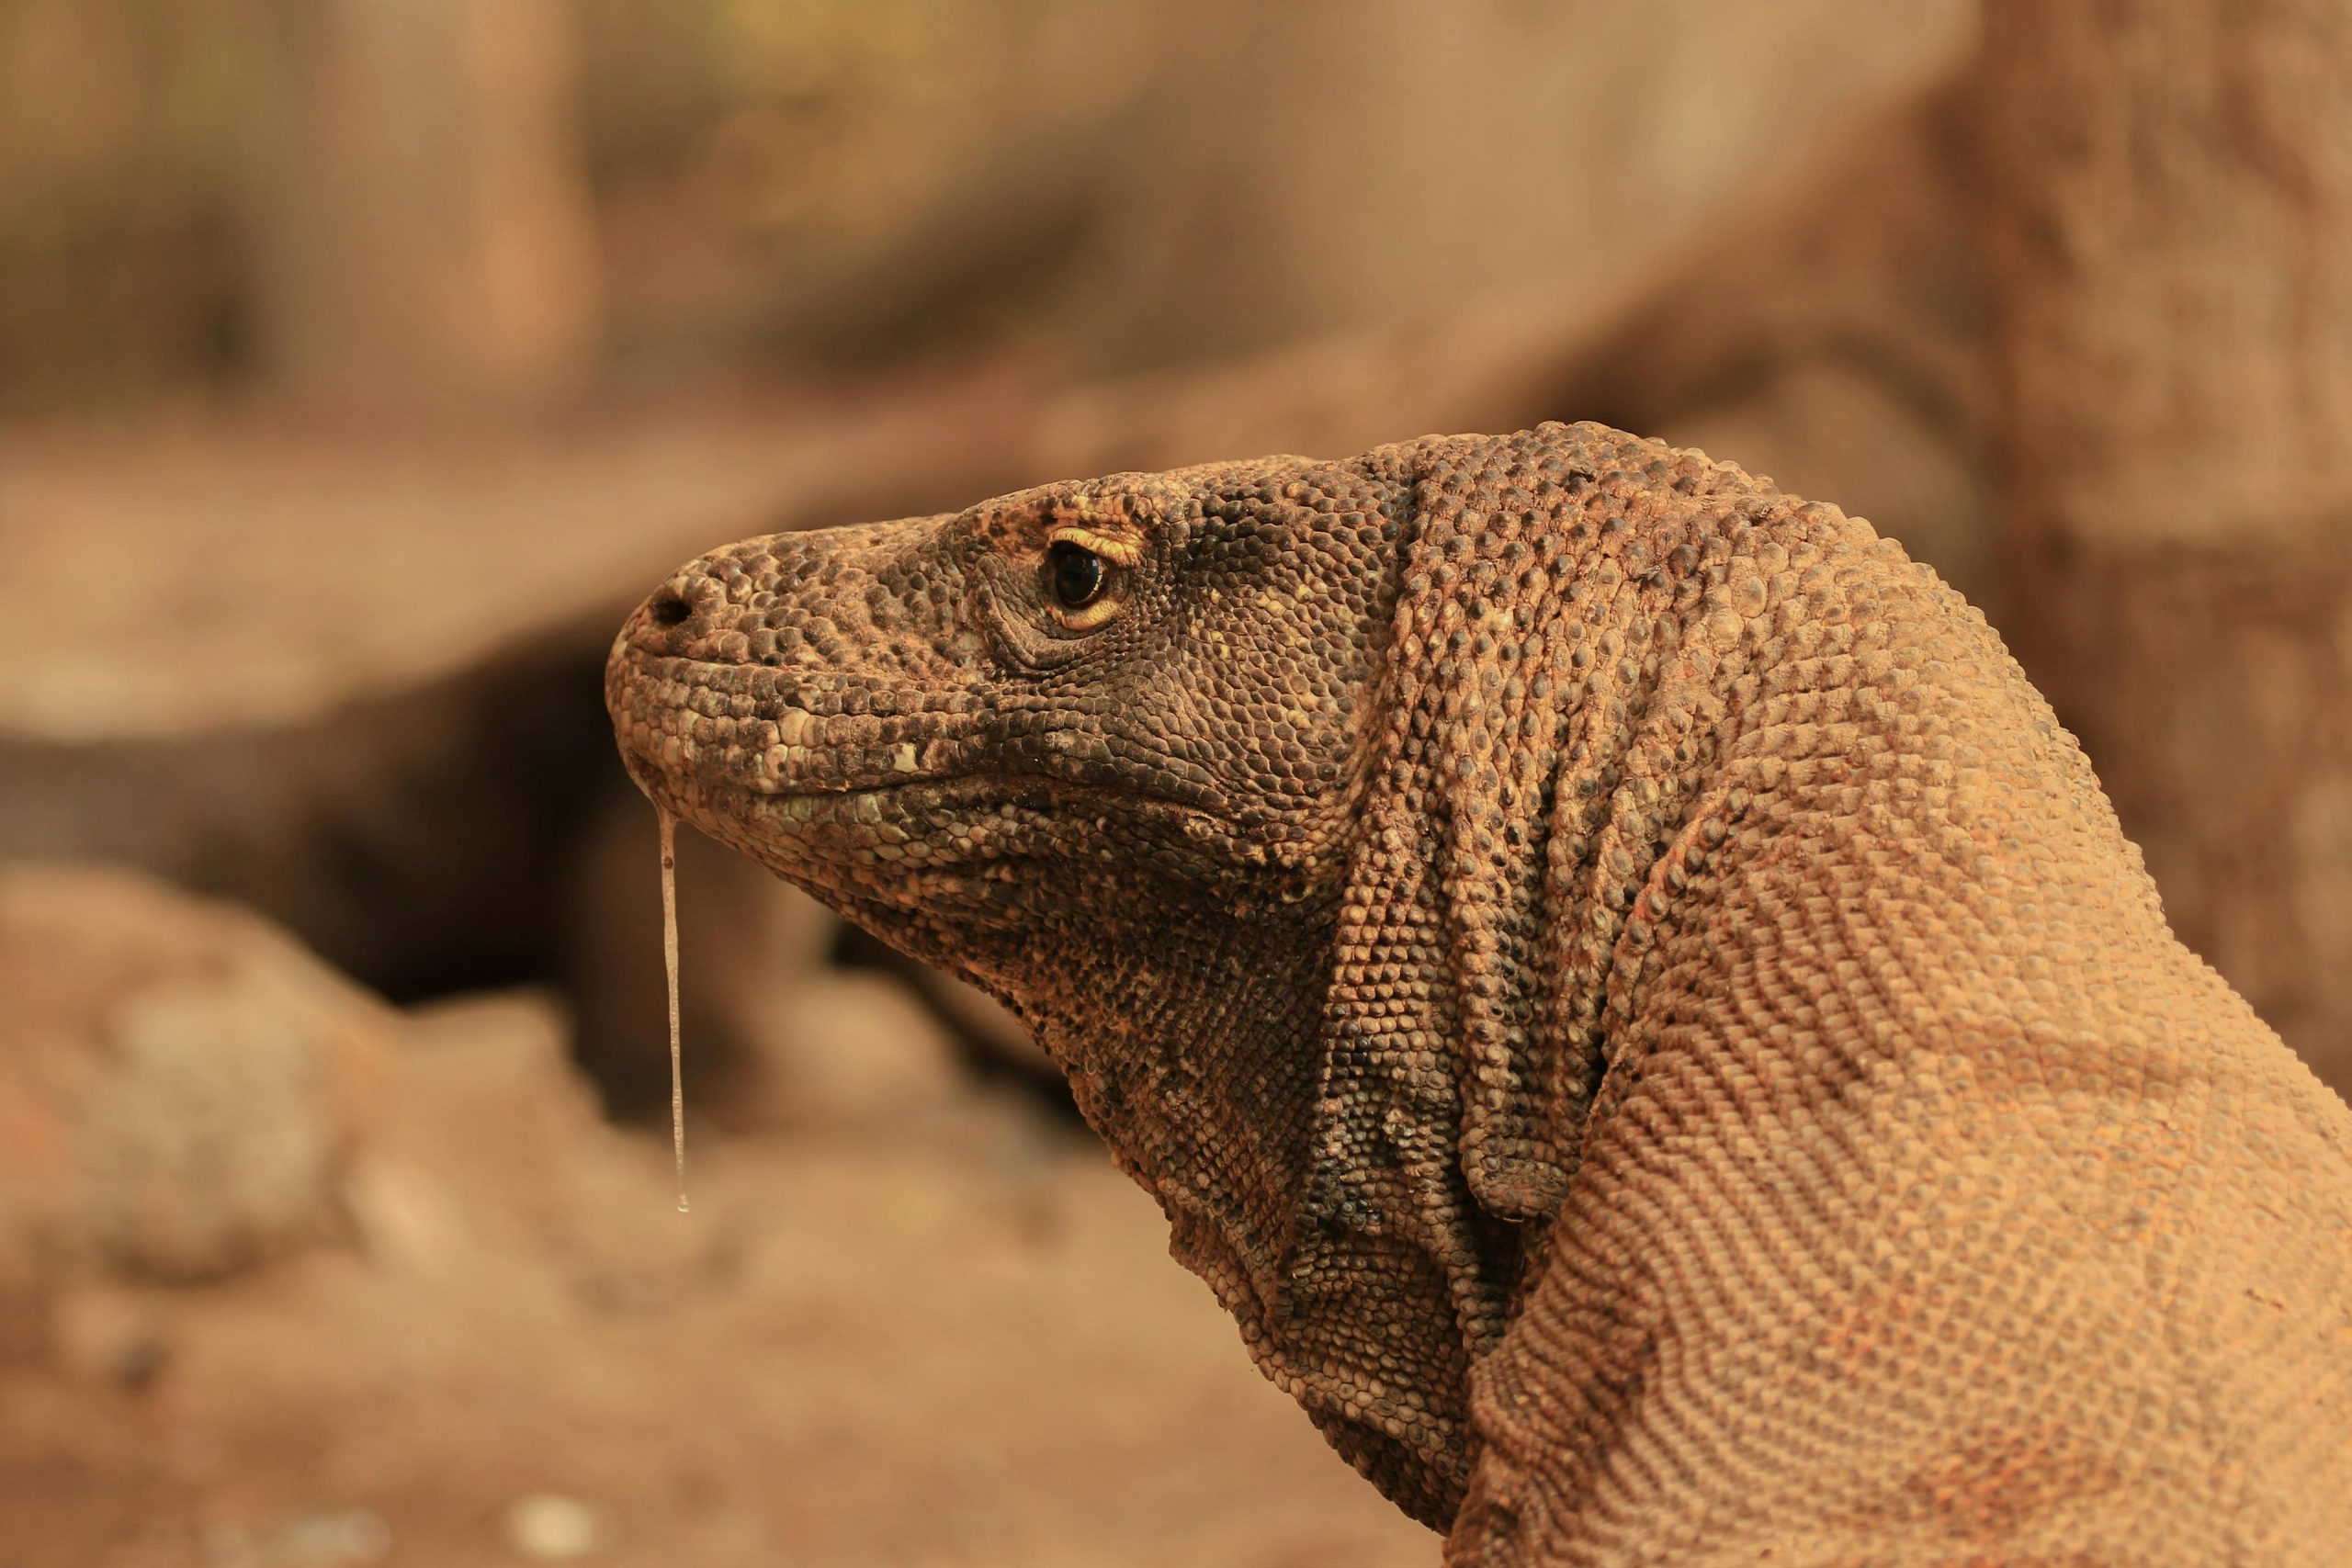 Photo of a Komodo dragon with spit